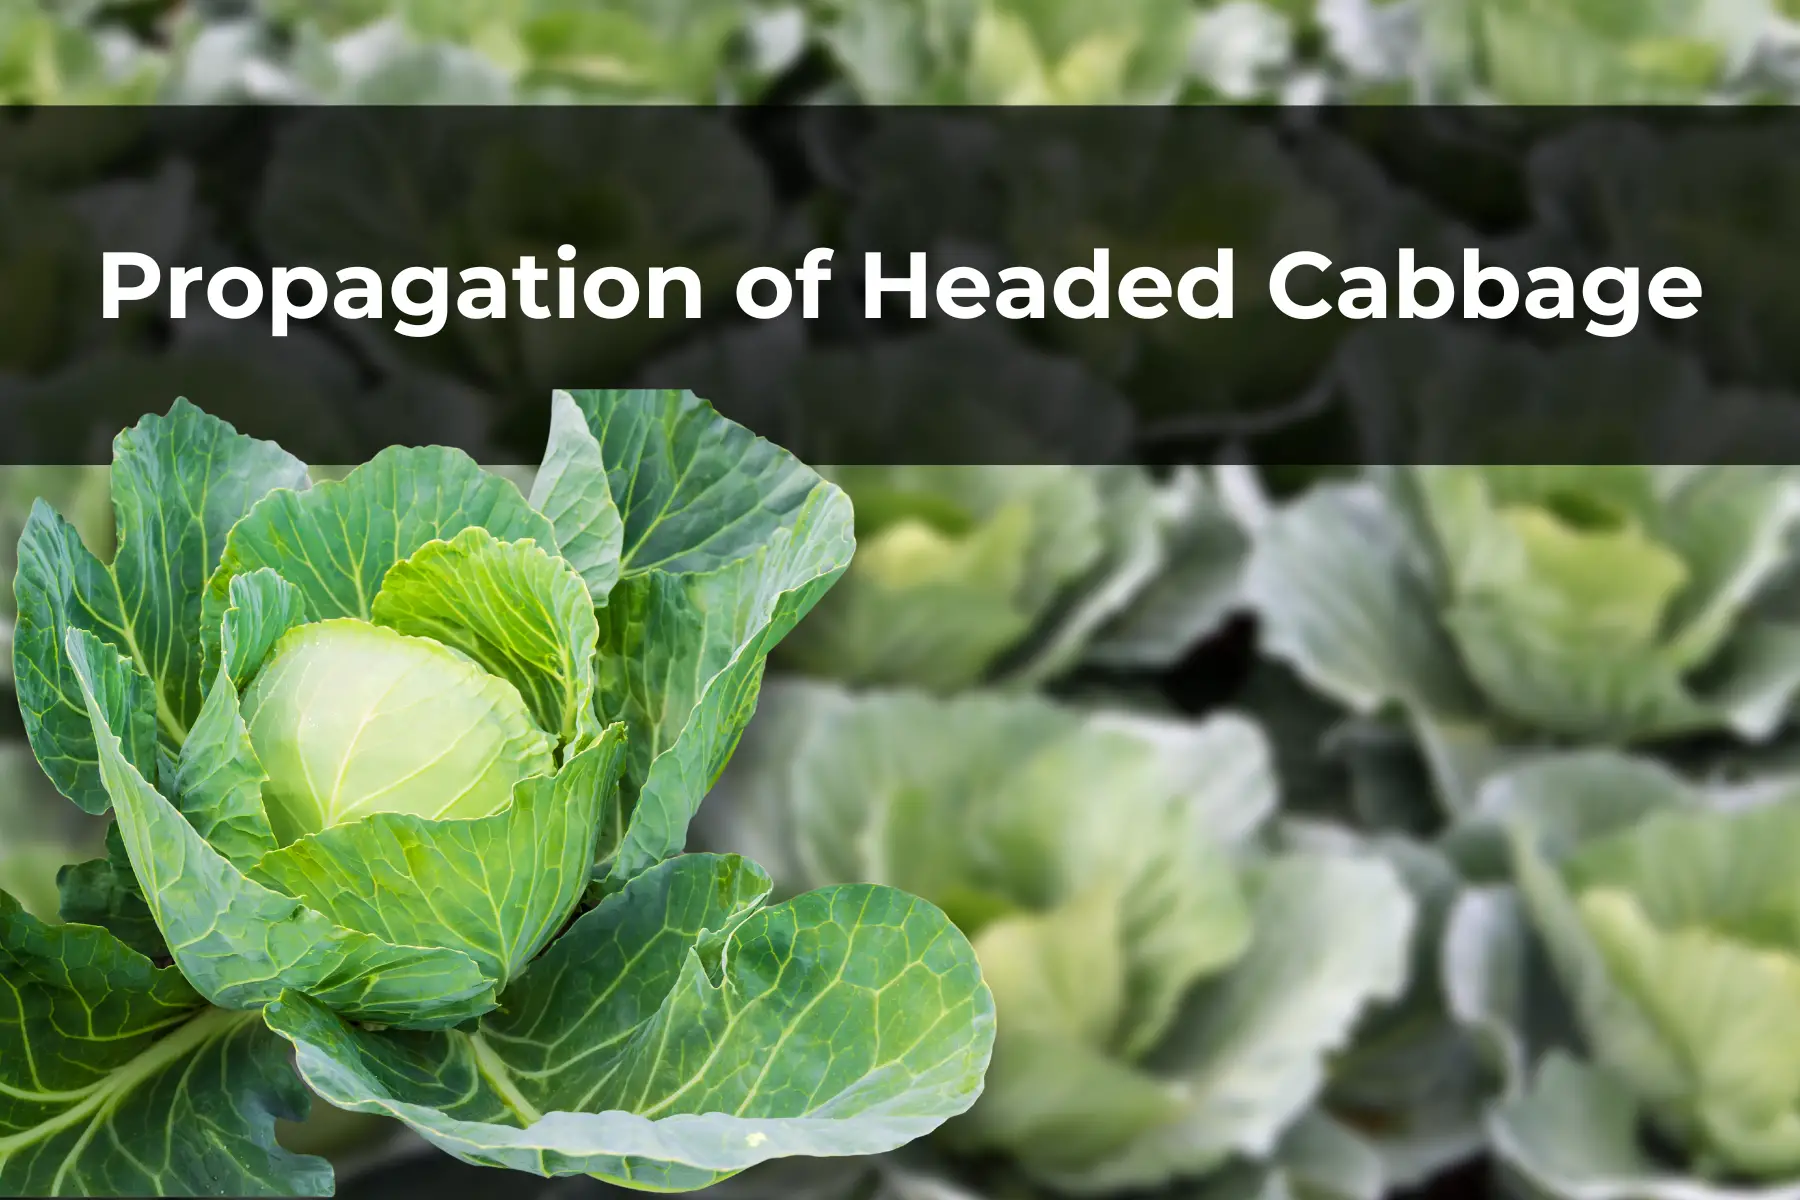 Propagation of Headed Cabbage